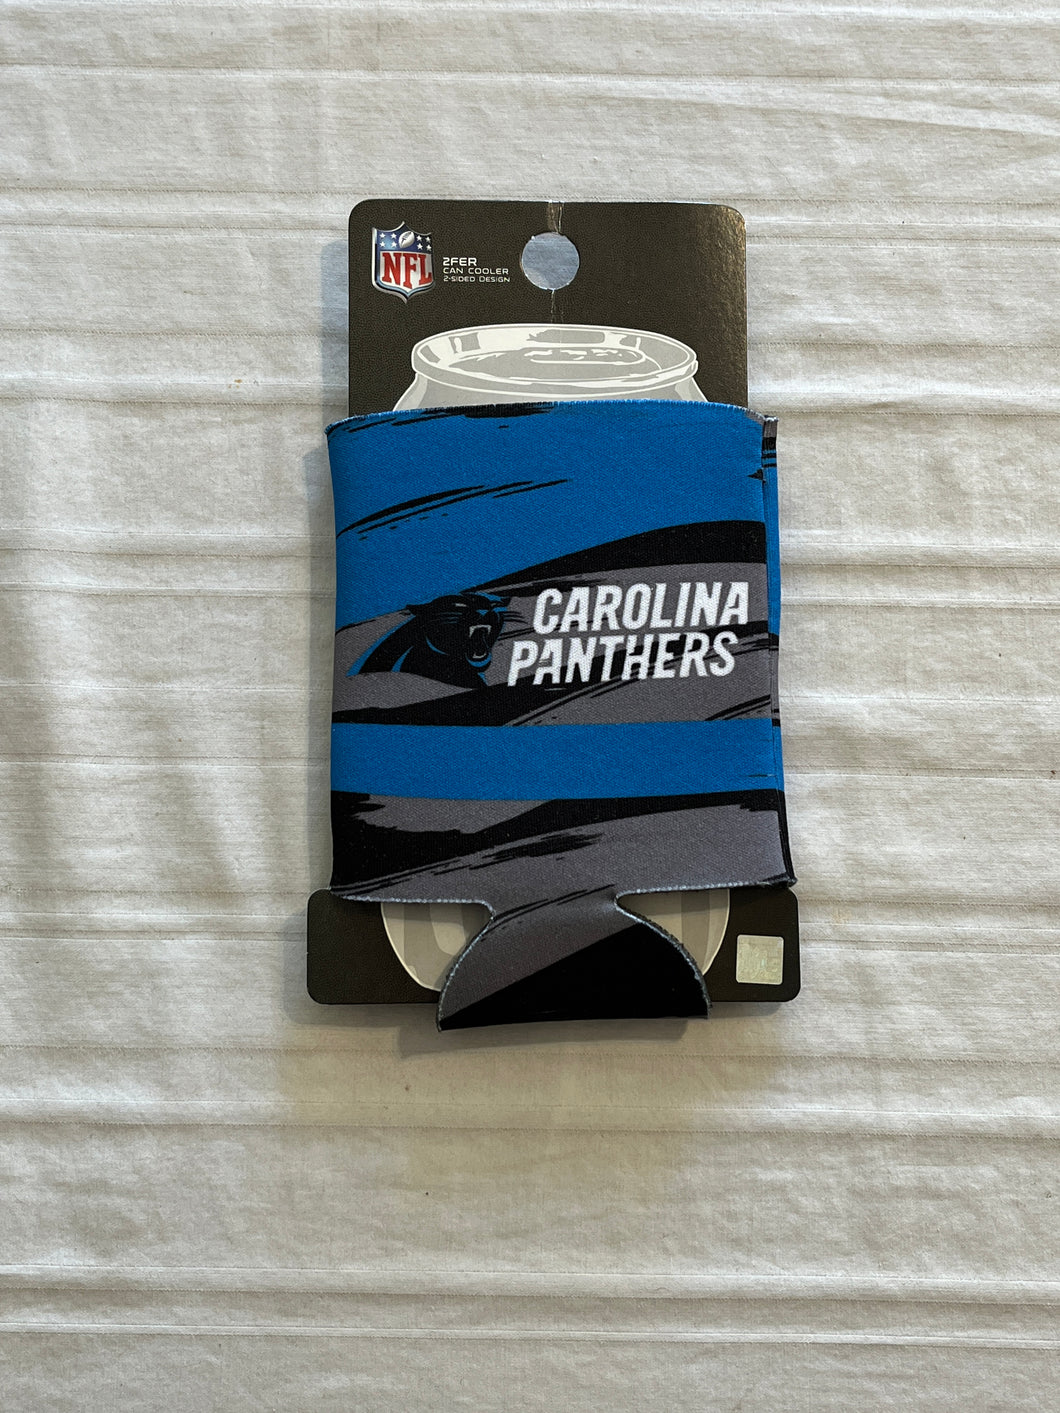 Carolina Panthers NFL 2-Sided Koozies Coozies Can Cooler Wincraft - Casey's Sports Store